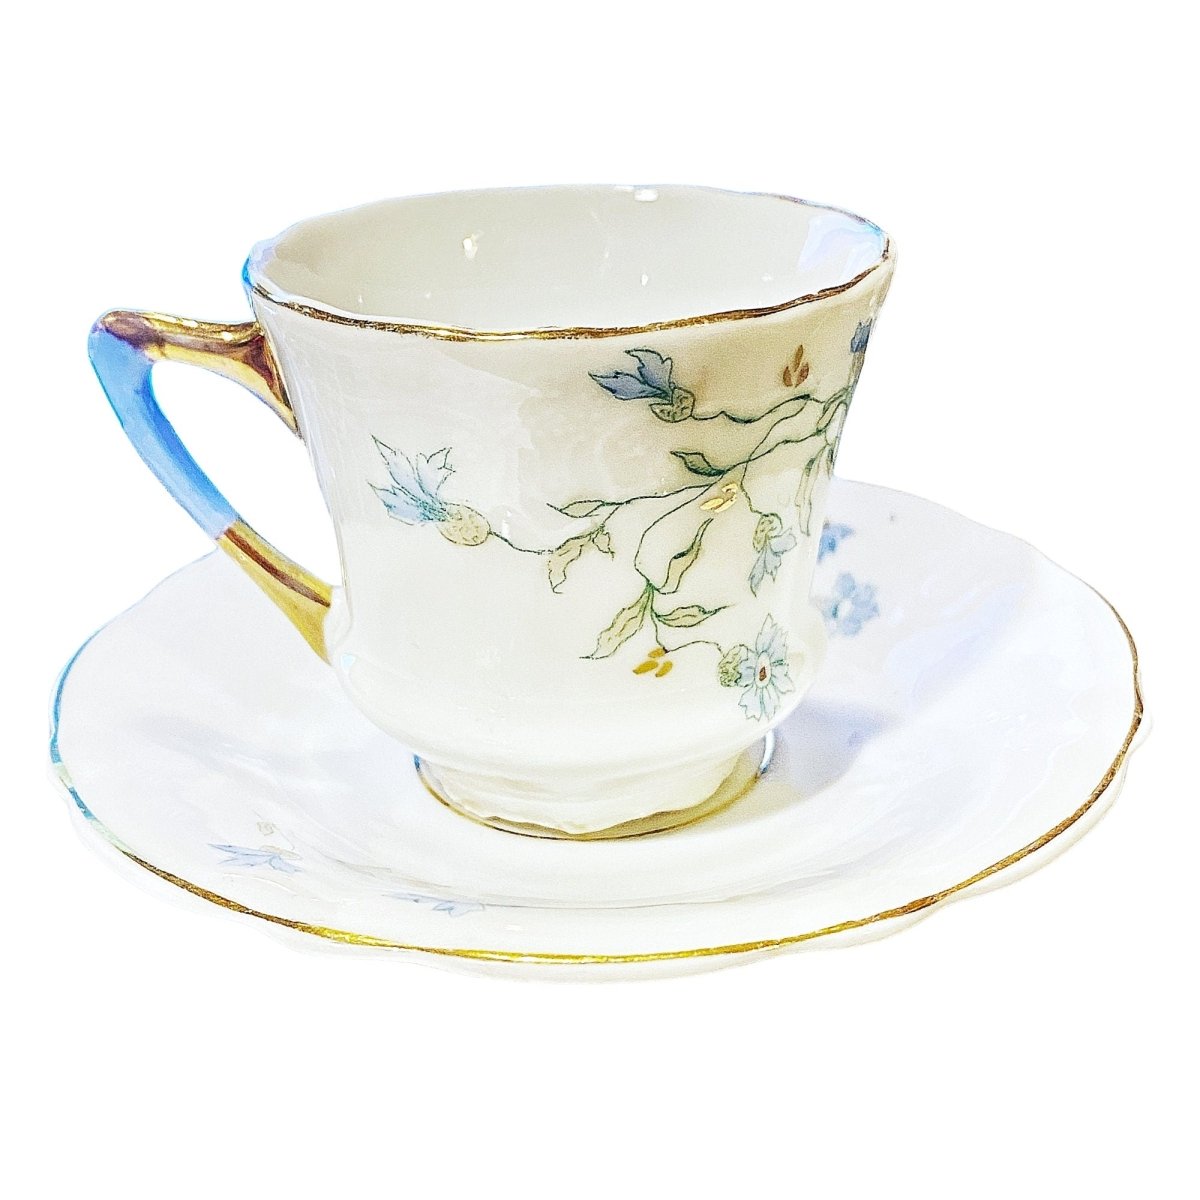 Carl Tielsch | Art Nouveau/Deco | Turquoise floral Tea Cup & Saucer with gold rim, and blue banded handle c. 1875-95, Silesia Germany (Poland) - Chinamania.shop